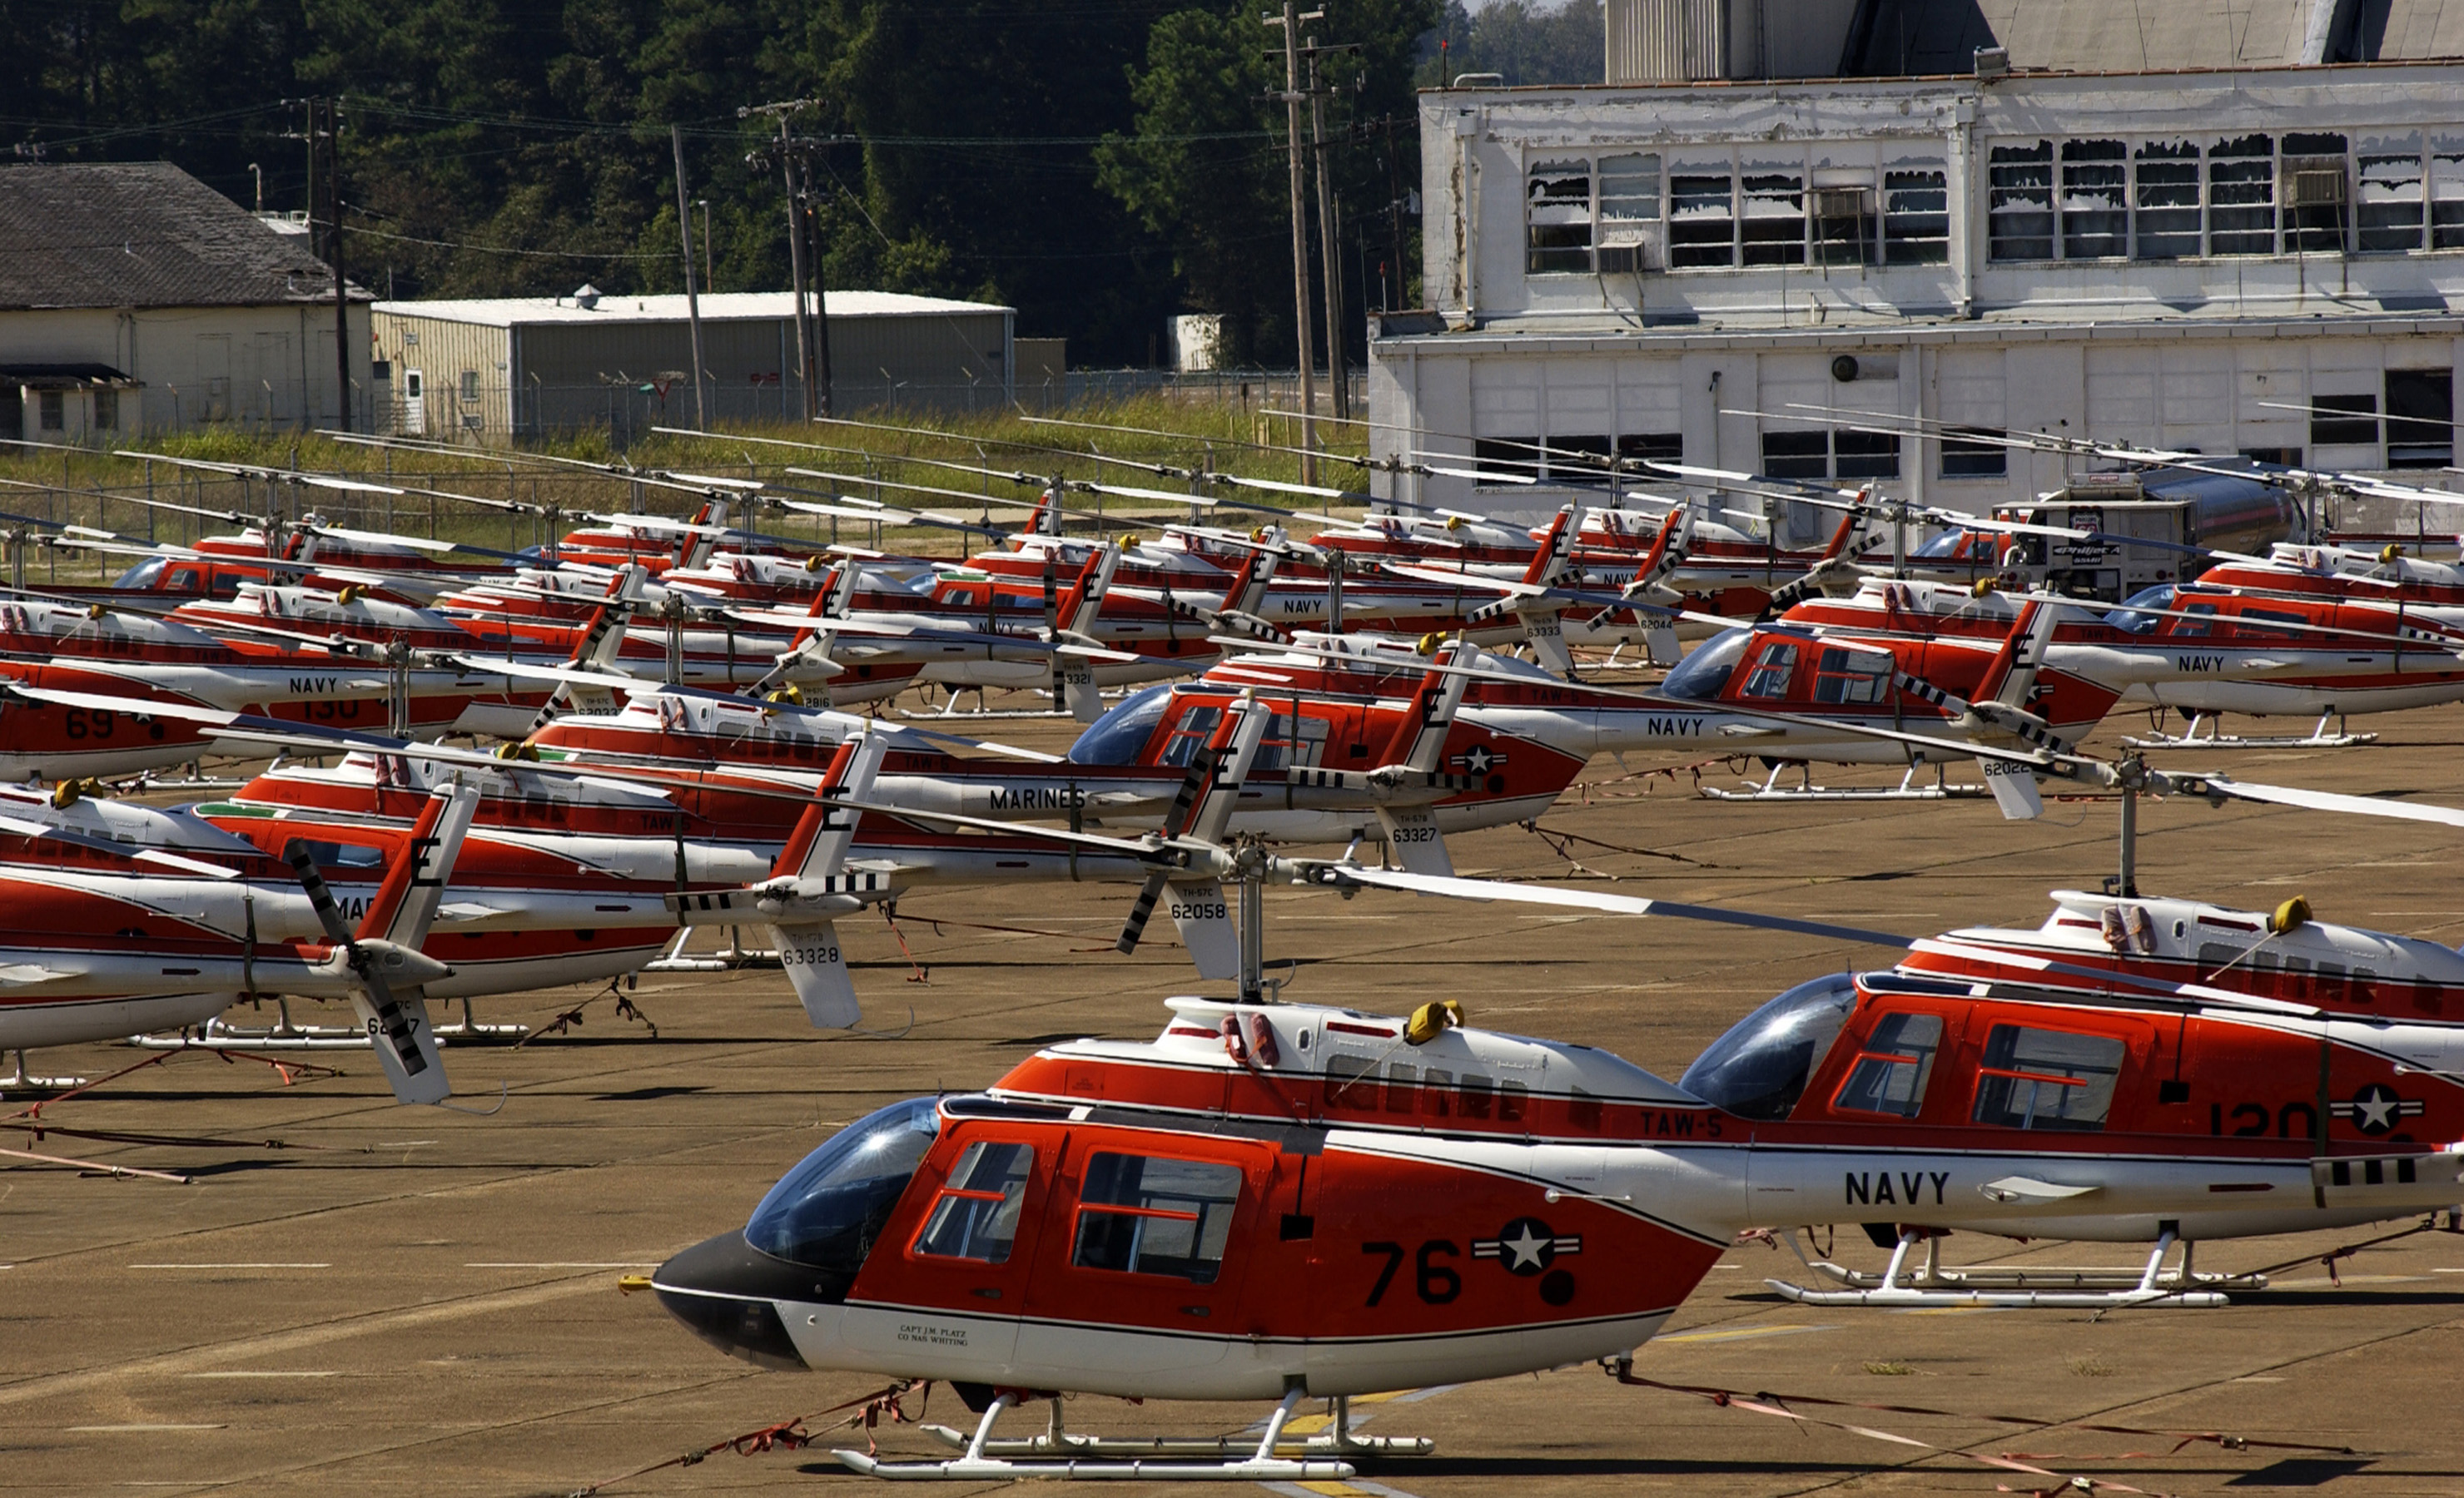 US Navy 040915-N-3659B-002 TH-57 Sea Ranger Helicopters sit on the flight line at Millington Municipal Airport